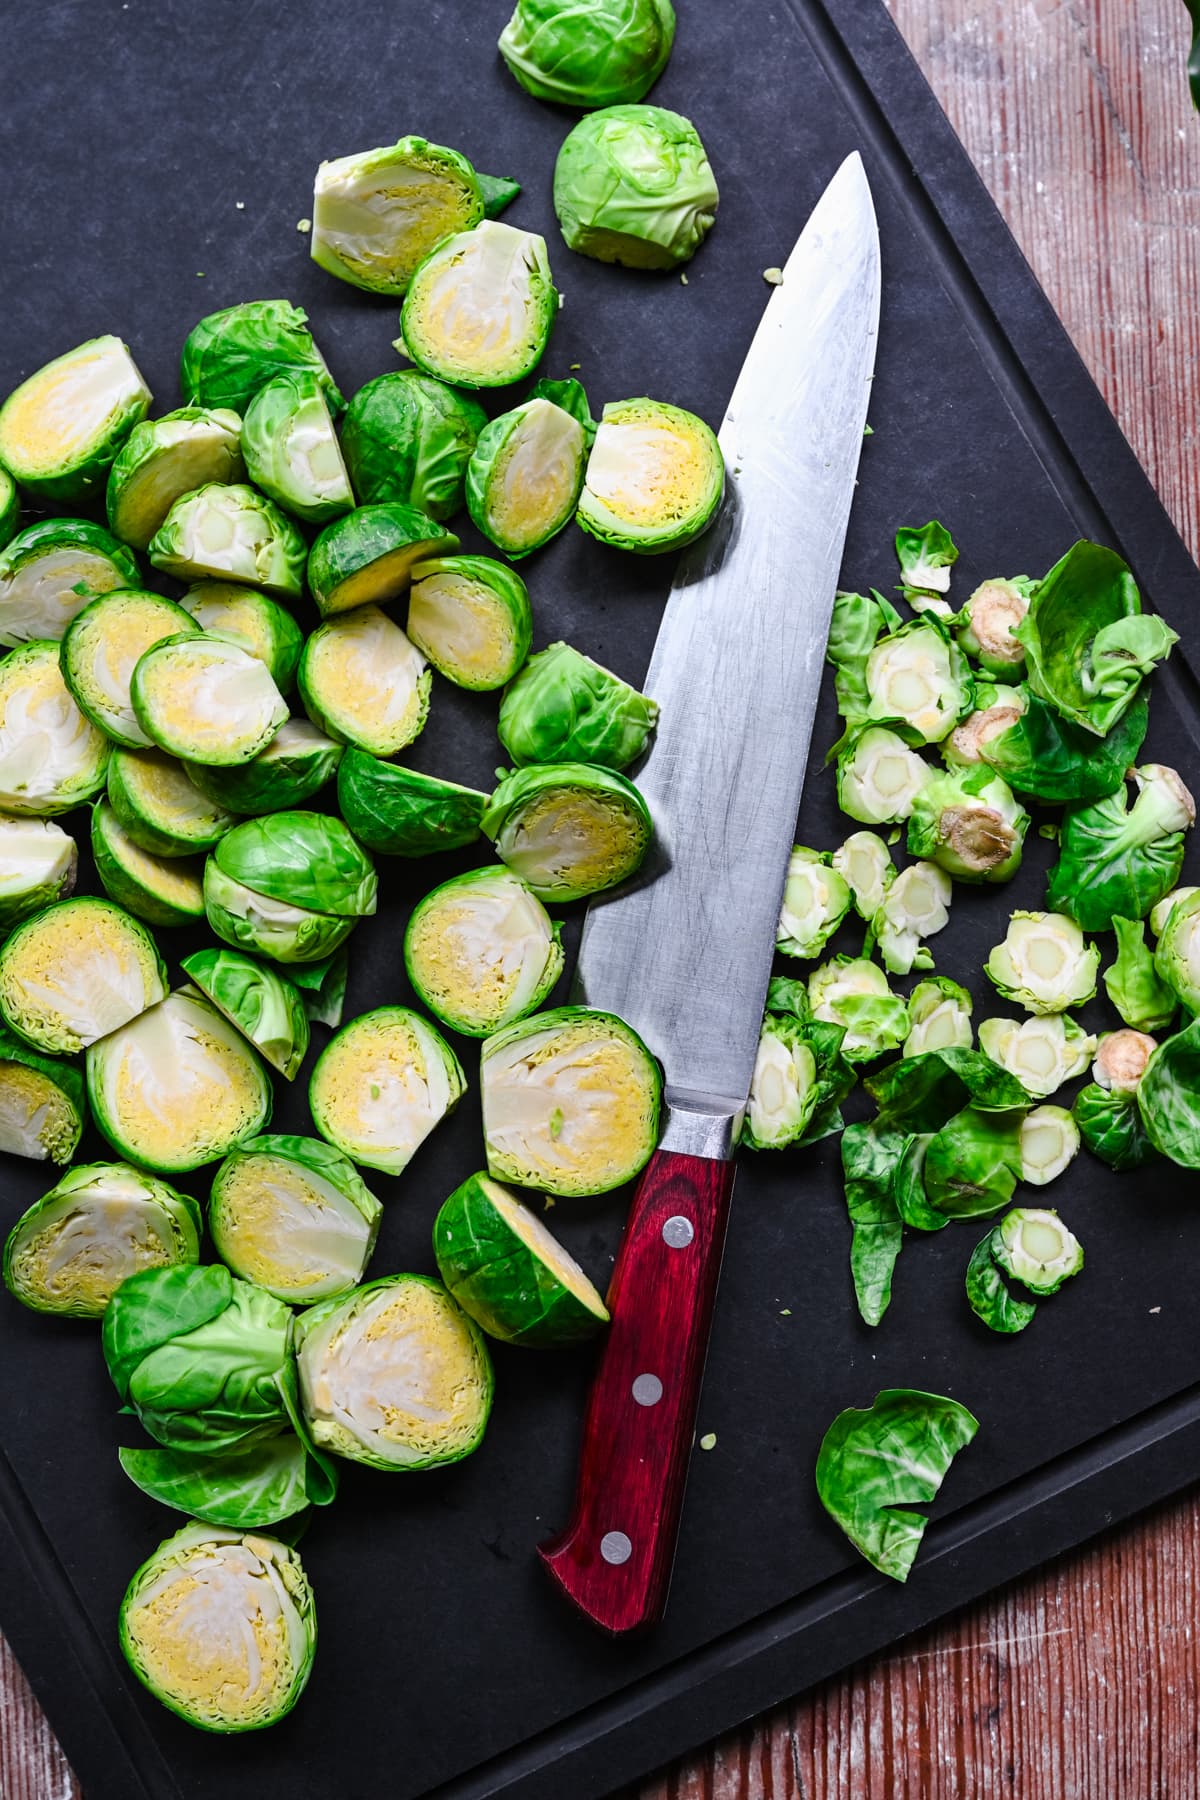 Halved brussels sprouts on a cutting board.